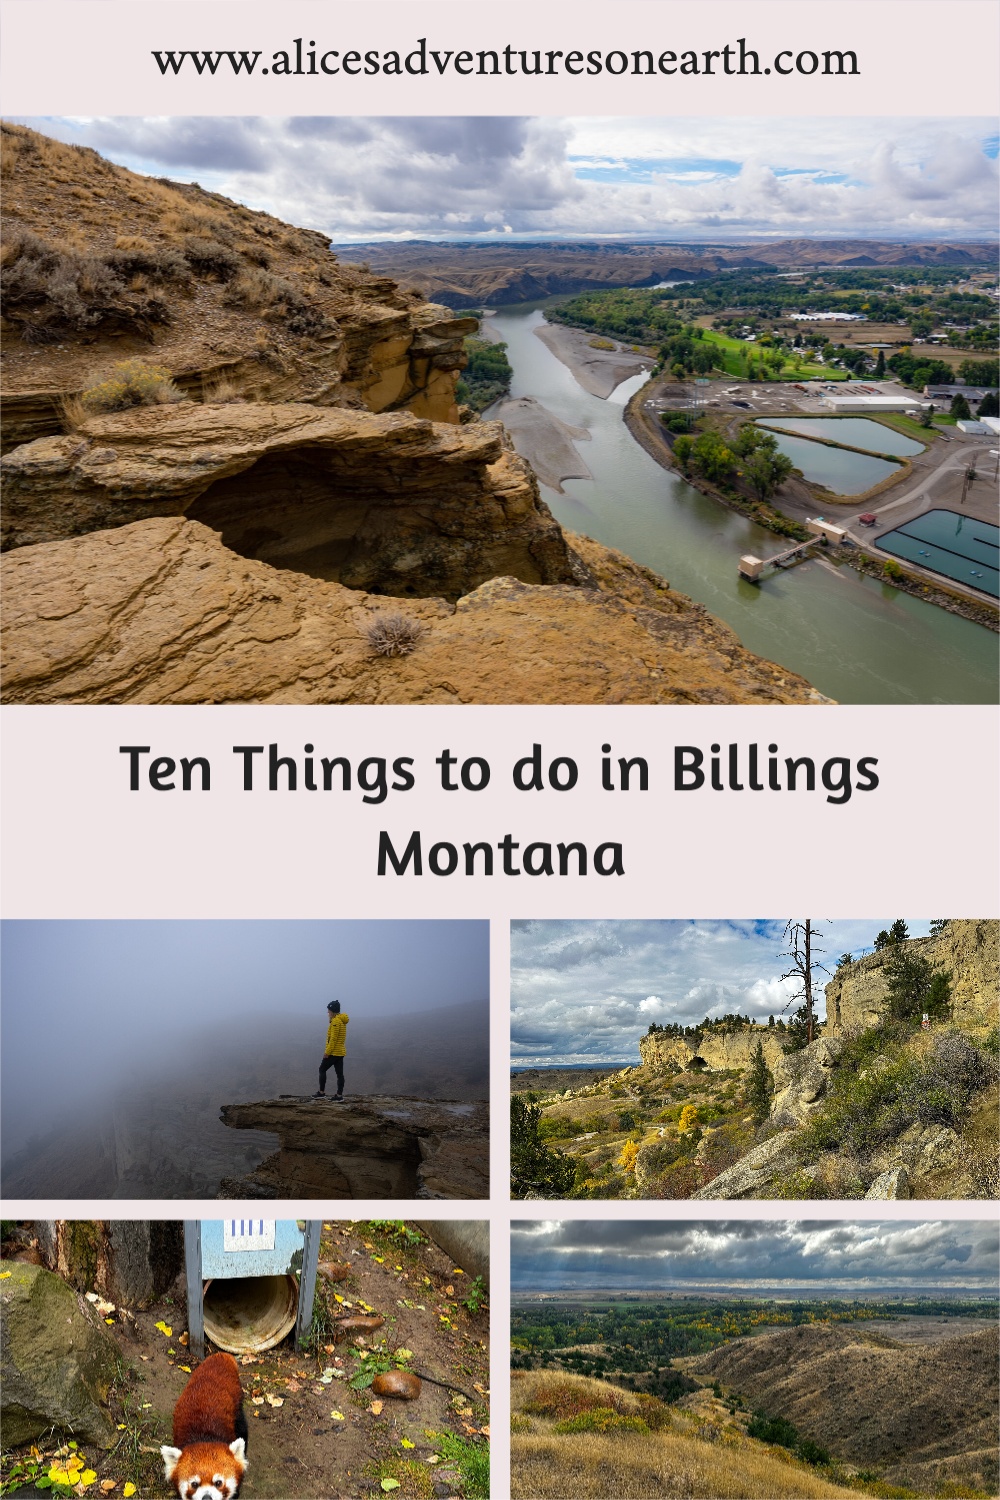 Billings is known as Montana's trailhead, a common stopover for roadtrippers on the way to Yellowstone there are a ton of great parks and places to eat. #montana